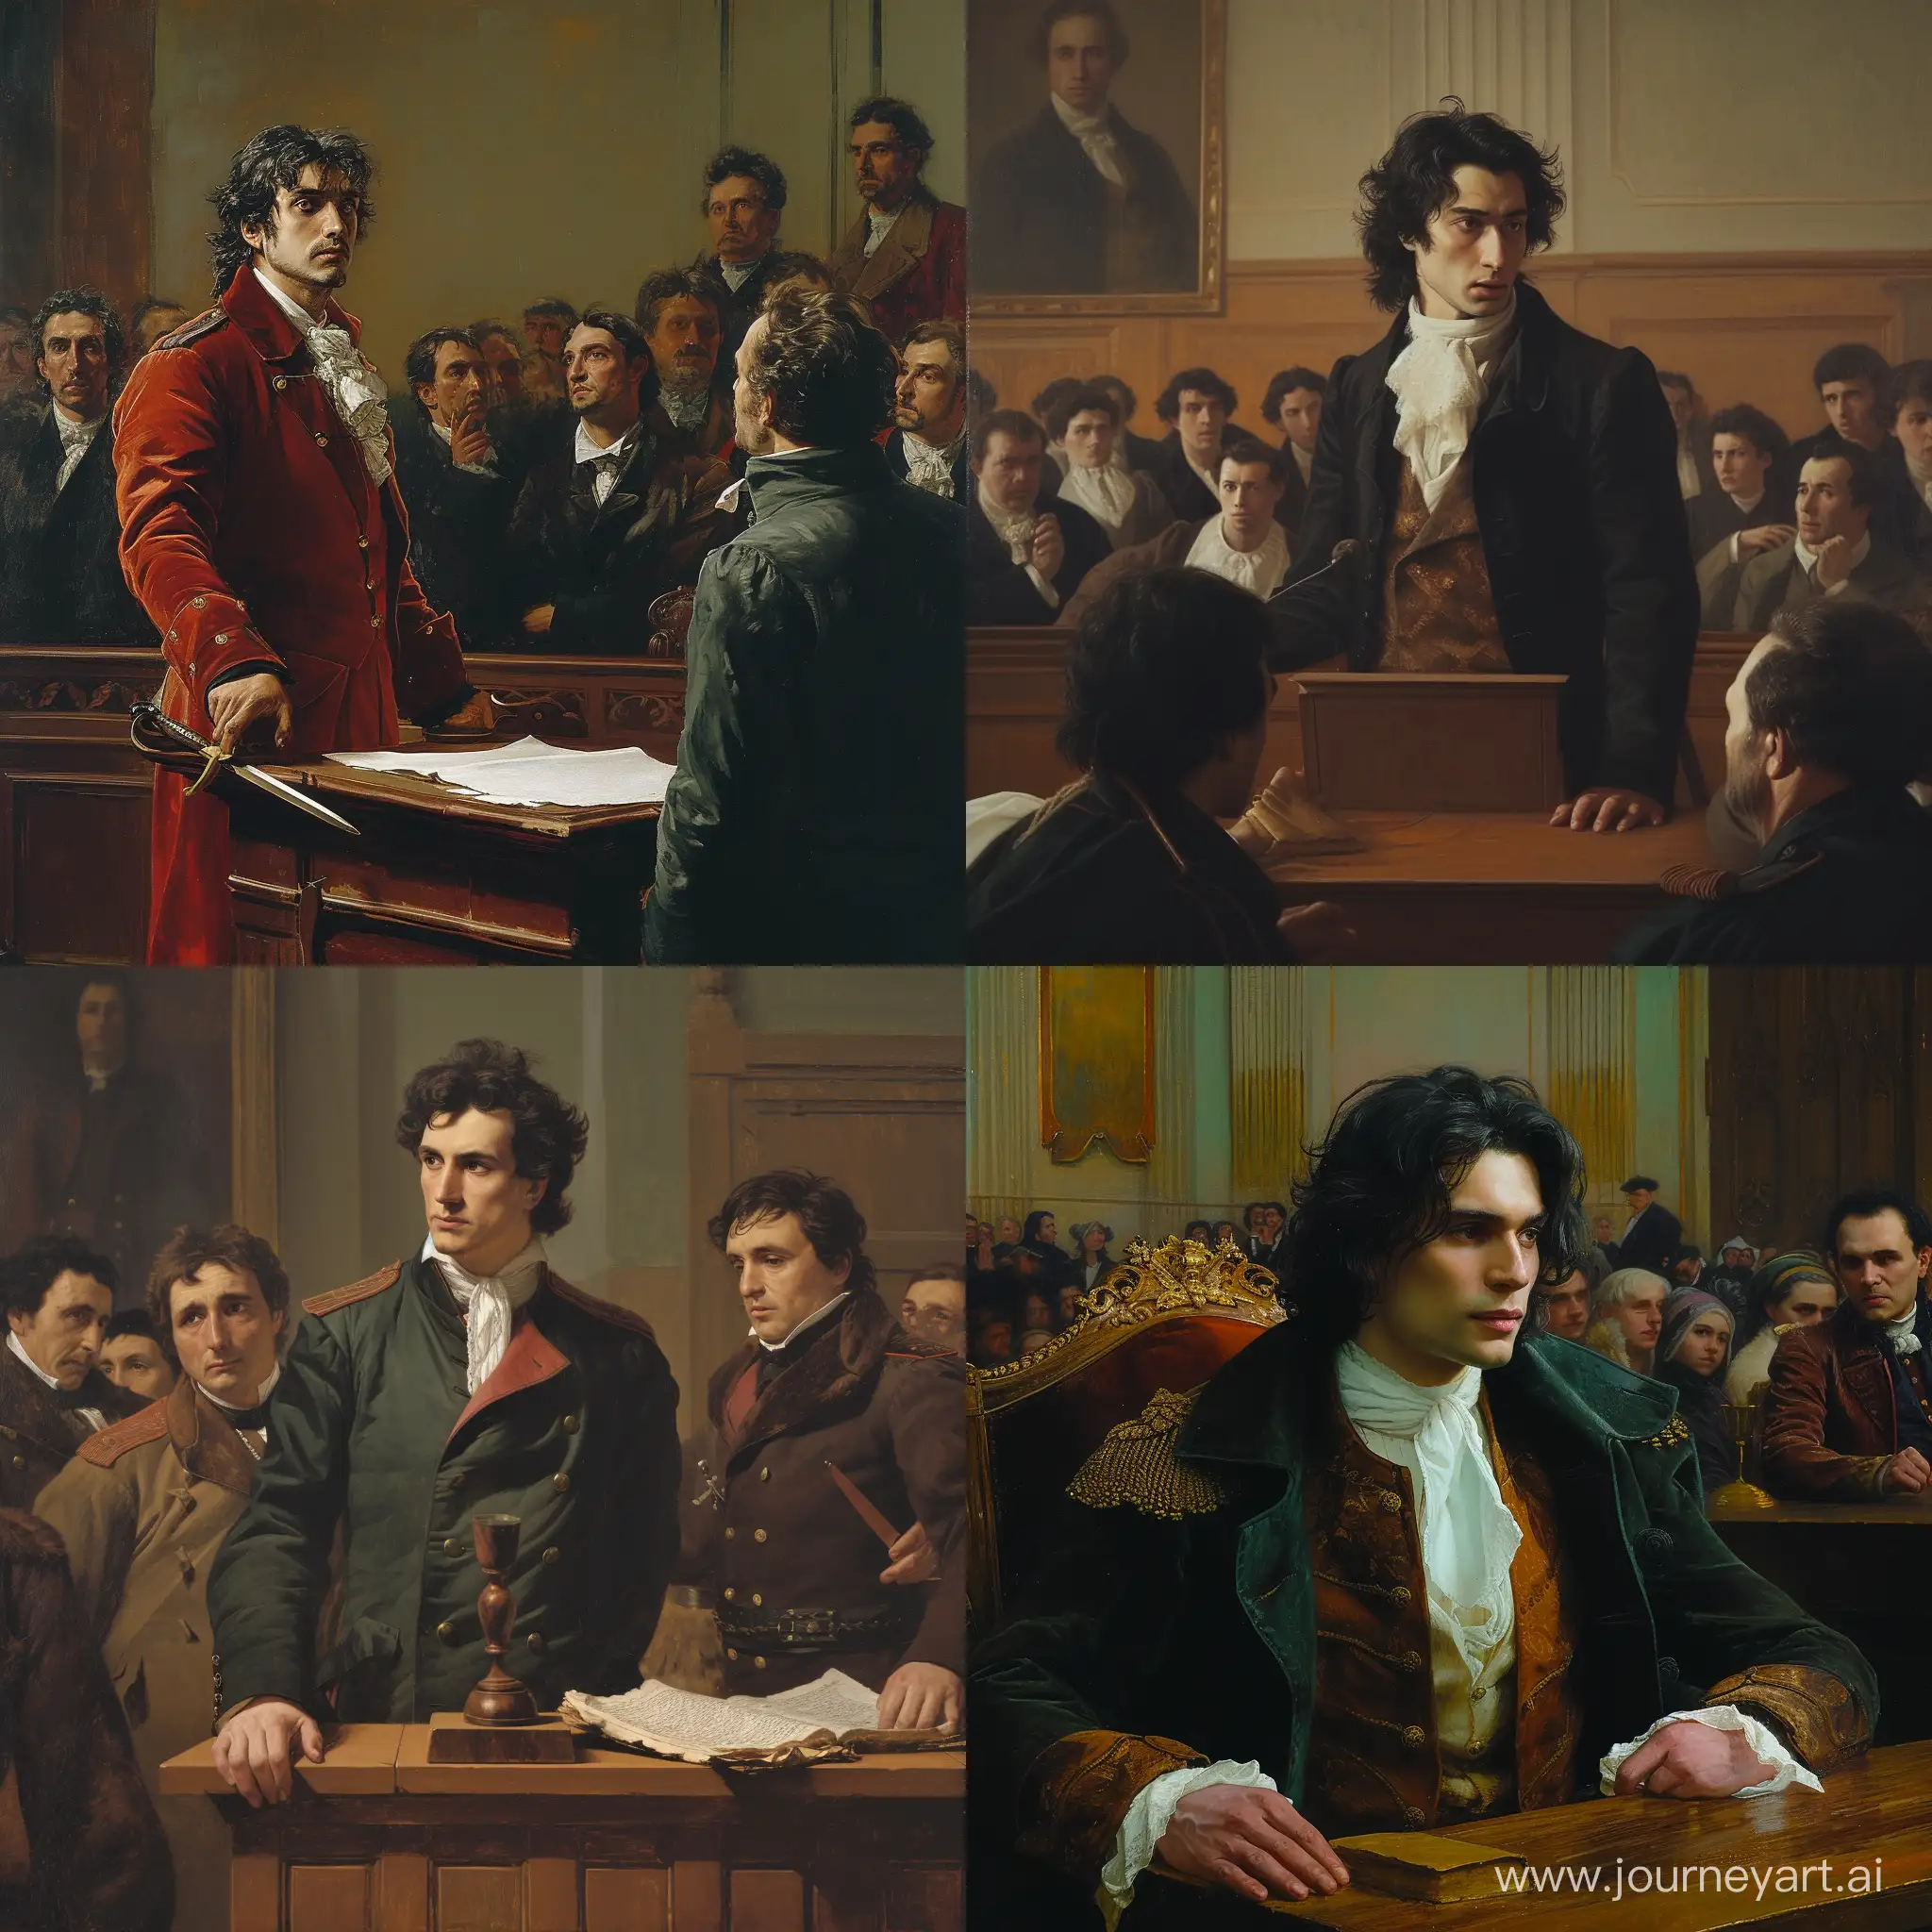 Eugene-Onegin-26YearOld-Pedant-in-Courtroom-Portrait